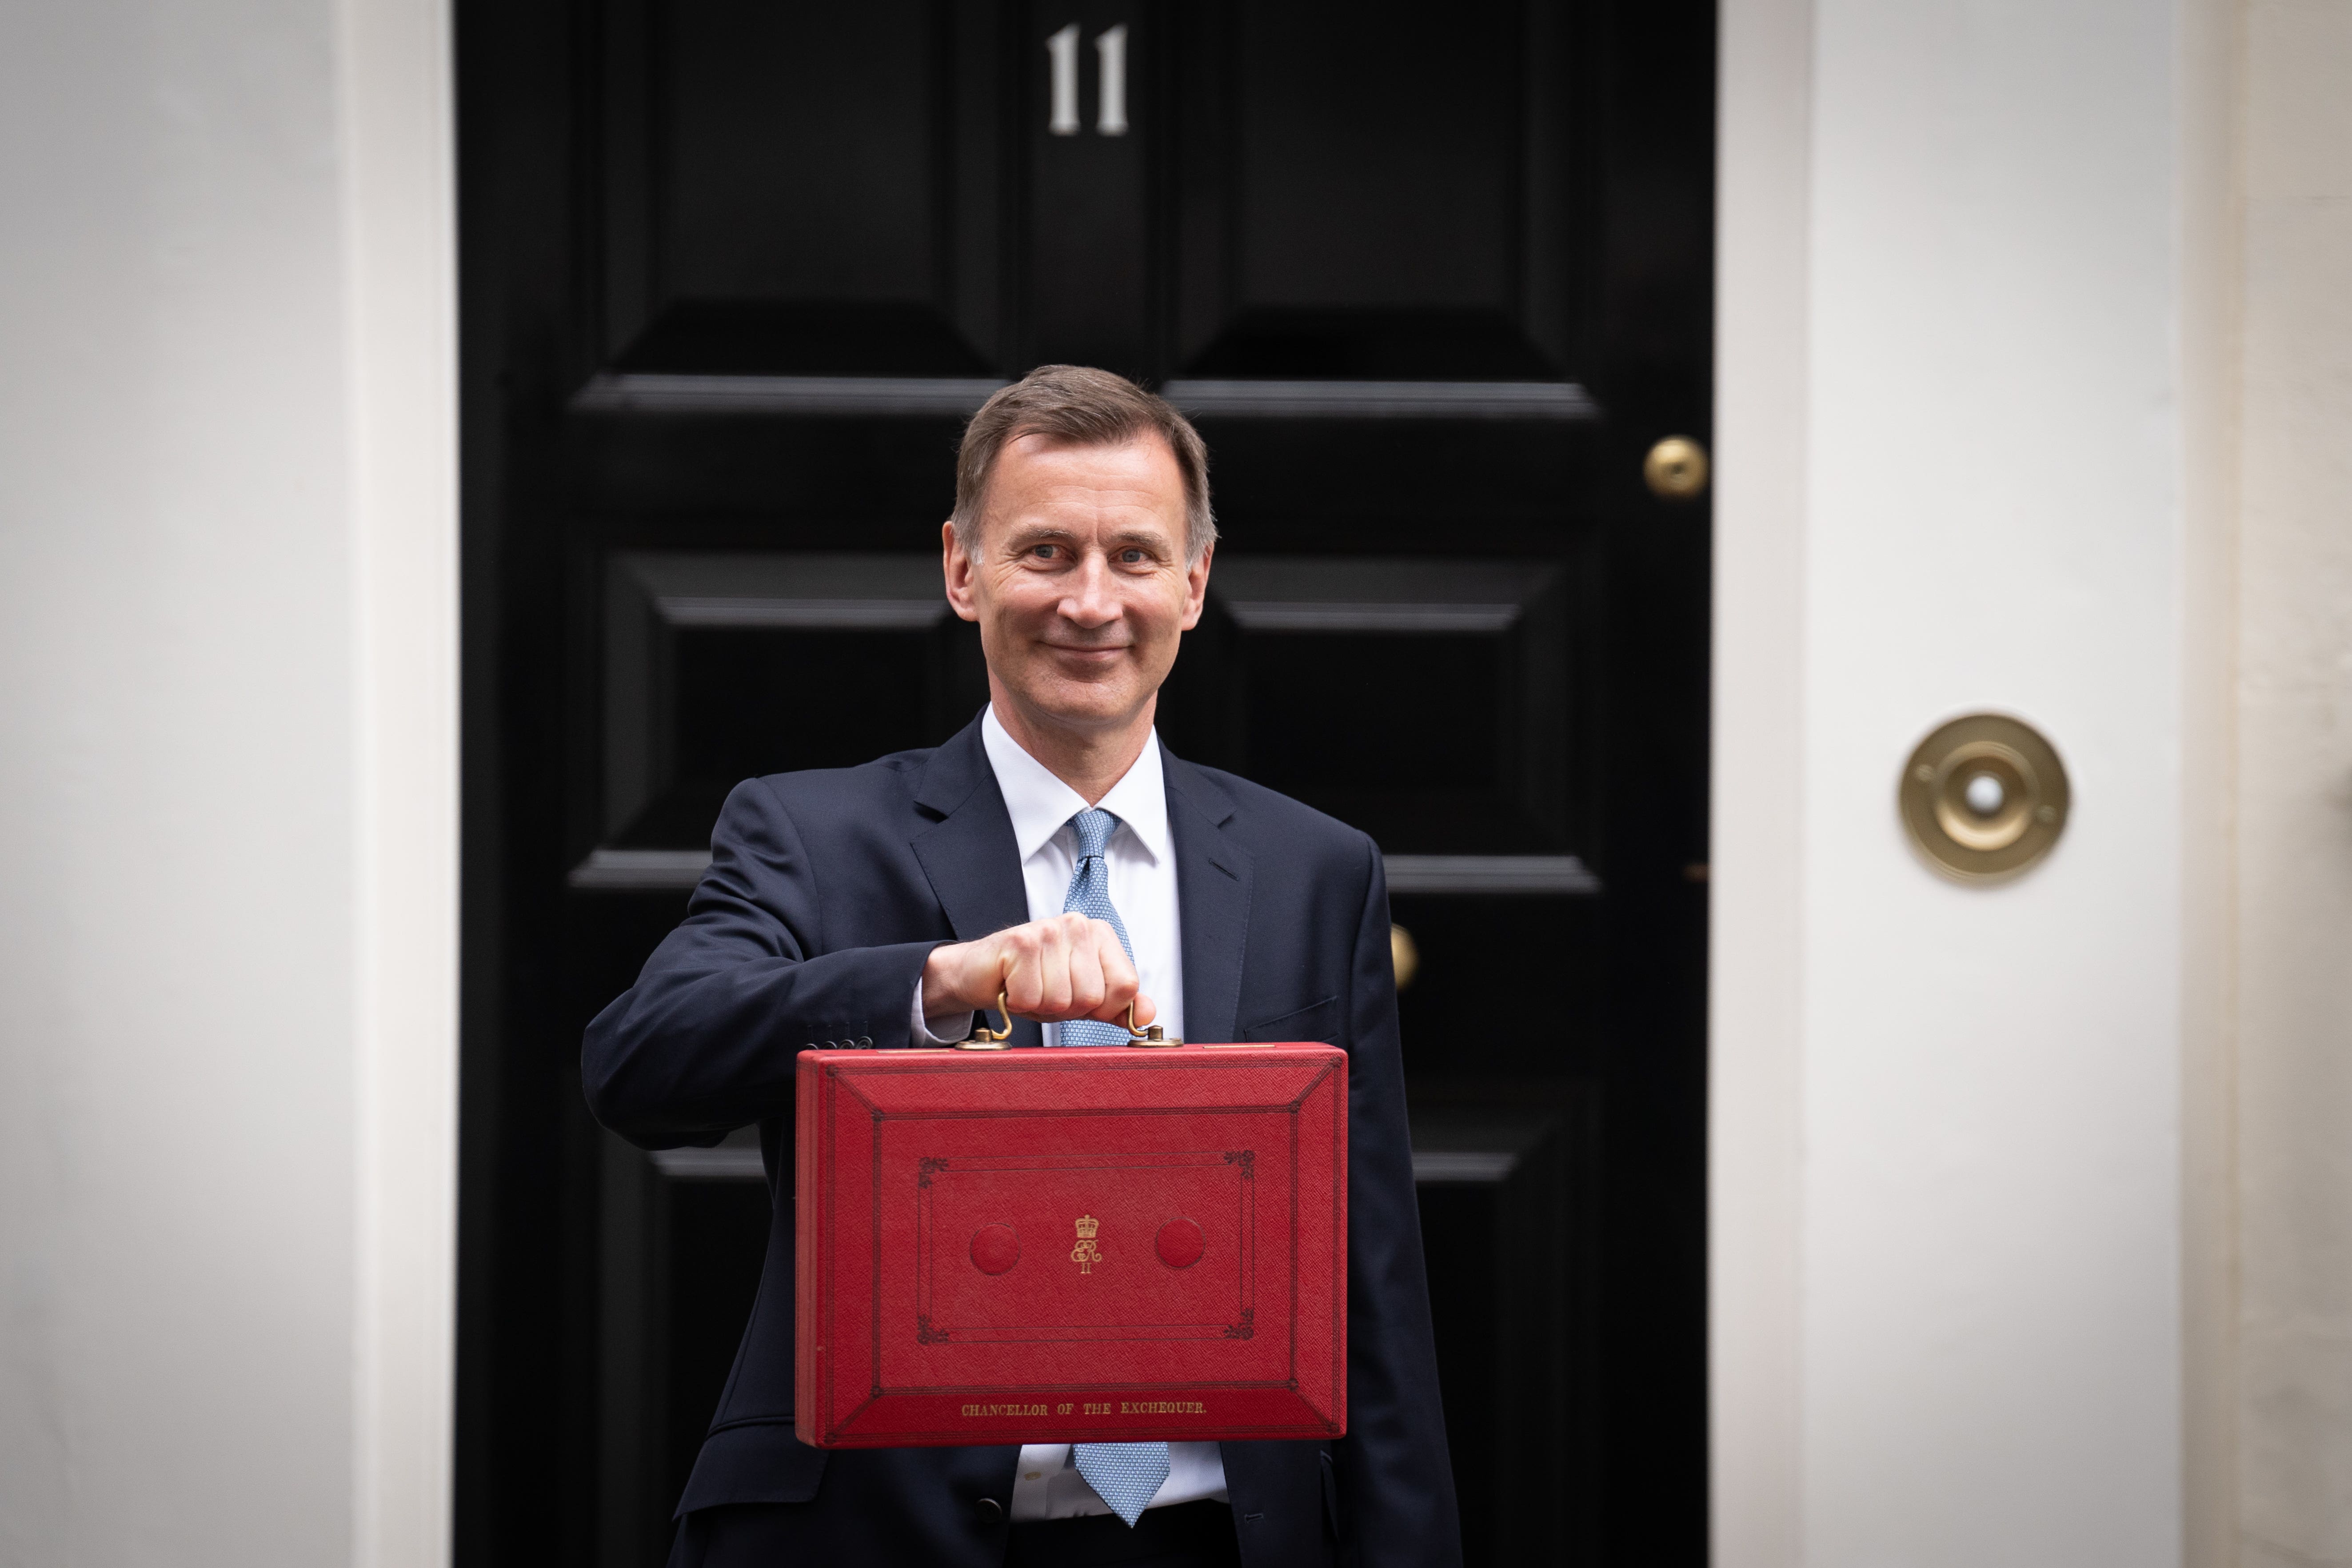 The Chancellor is widely anticipated to announce a package of tax cuts on Wednesday